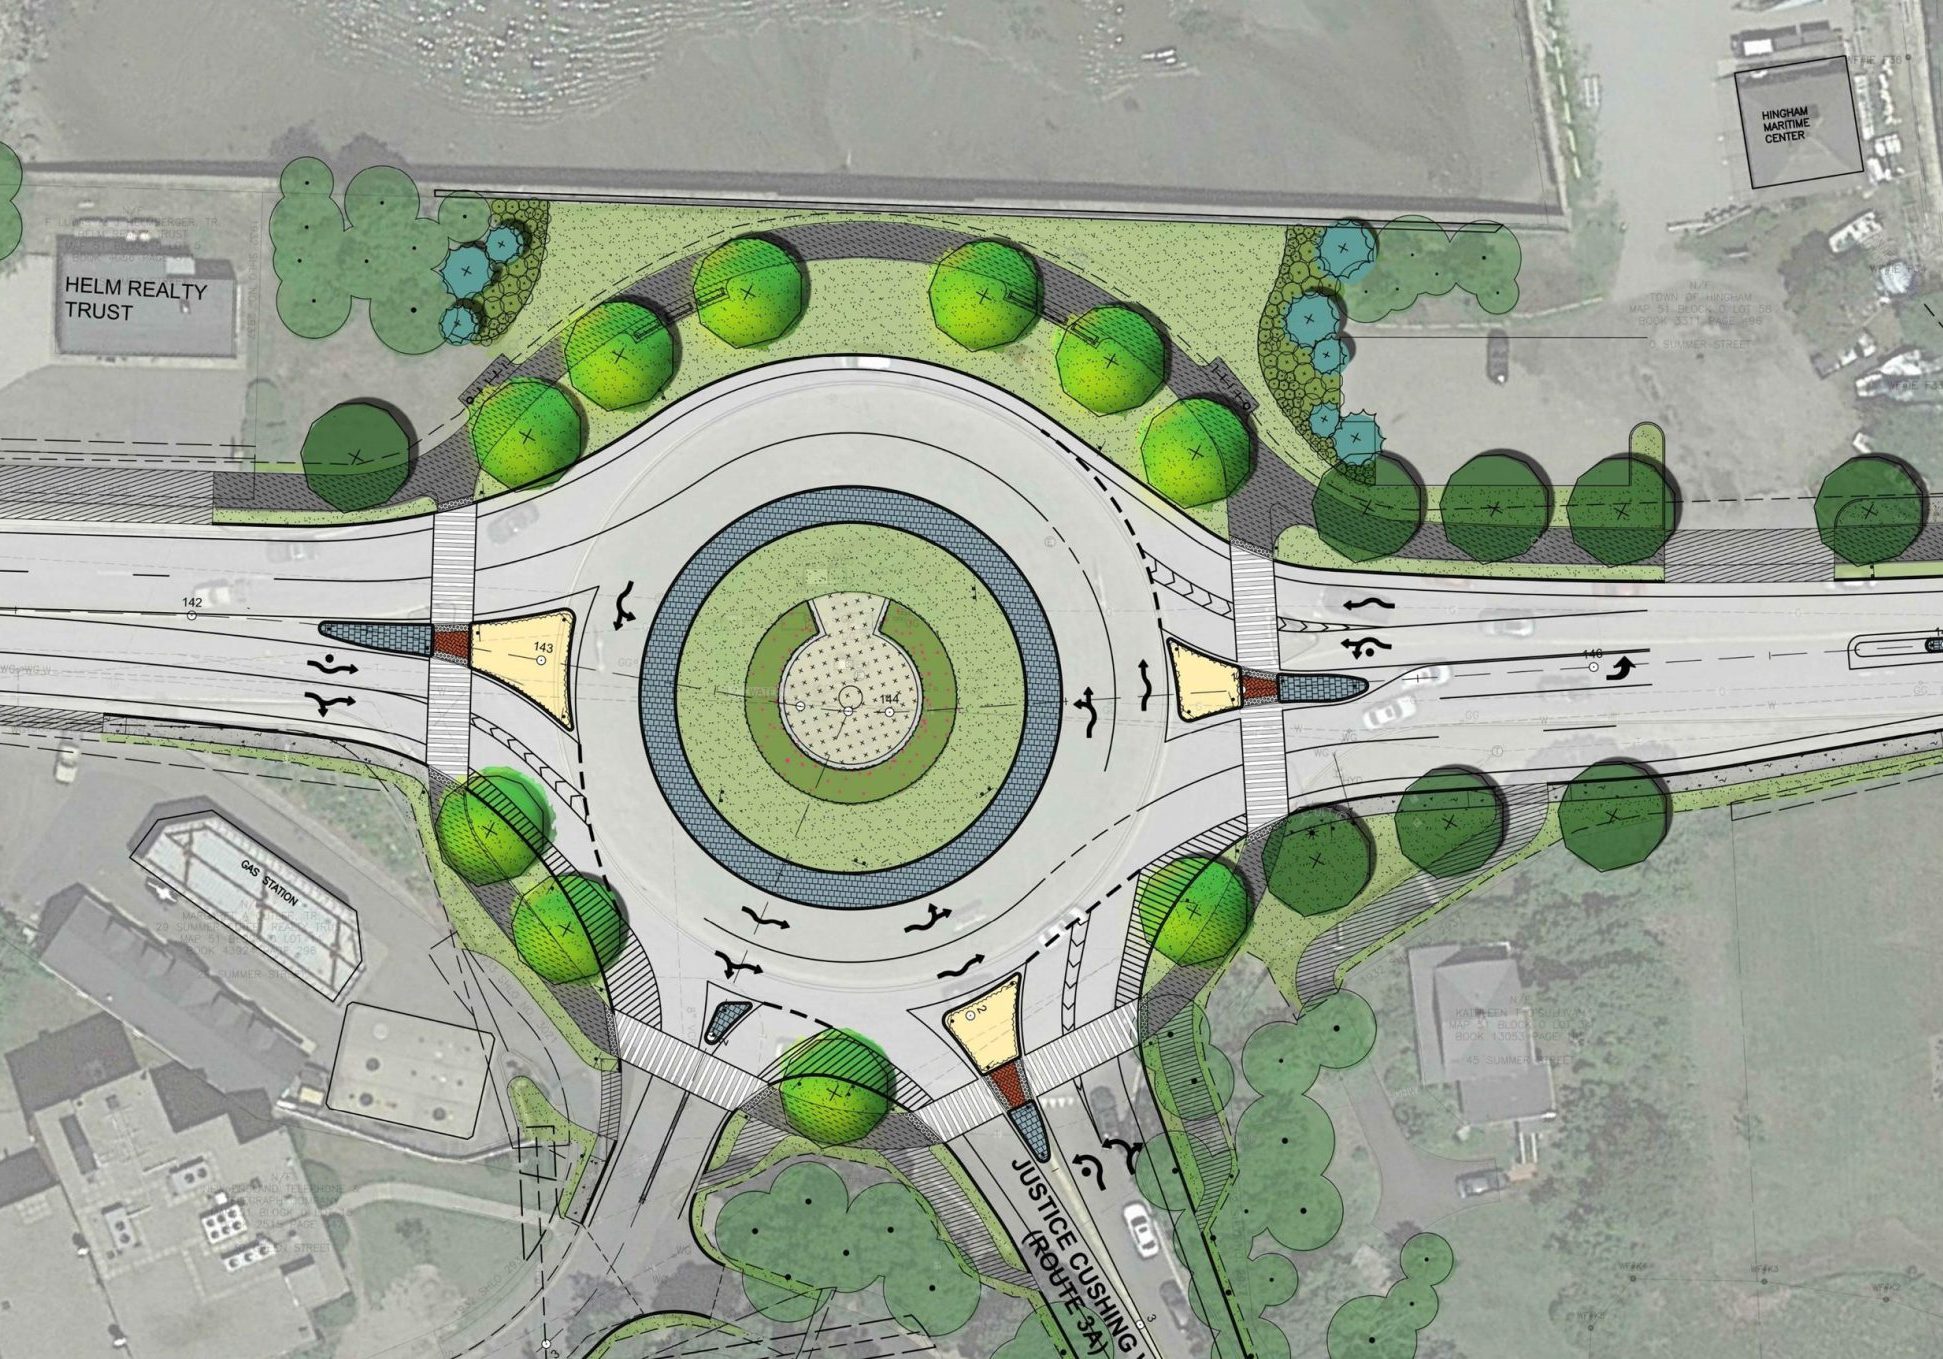 The Route 3A Rotary is reconfigured into a modern roundabout, with improved safety and accessibility for all transportation modes.